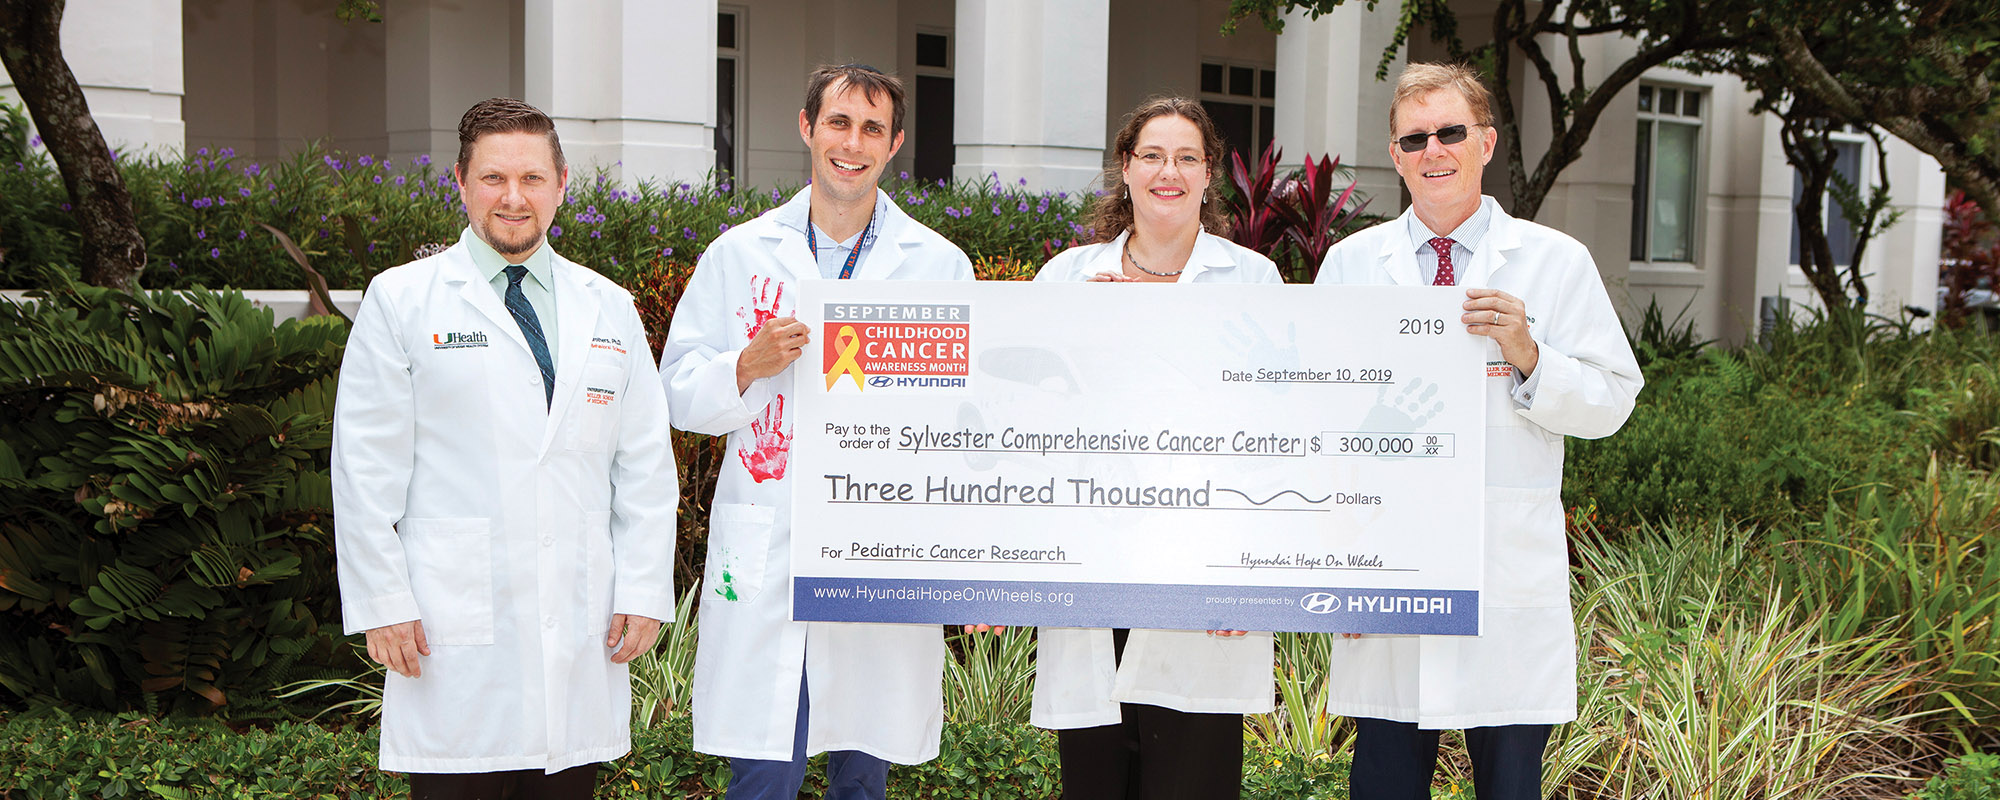 Sylvester Researchers pose with a large check